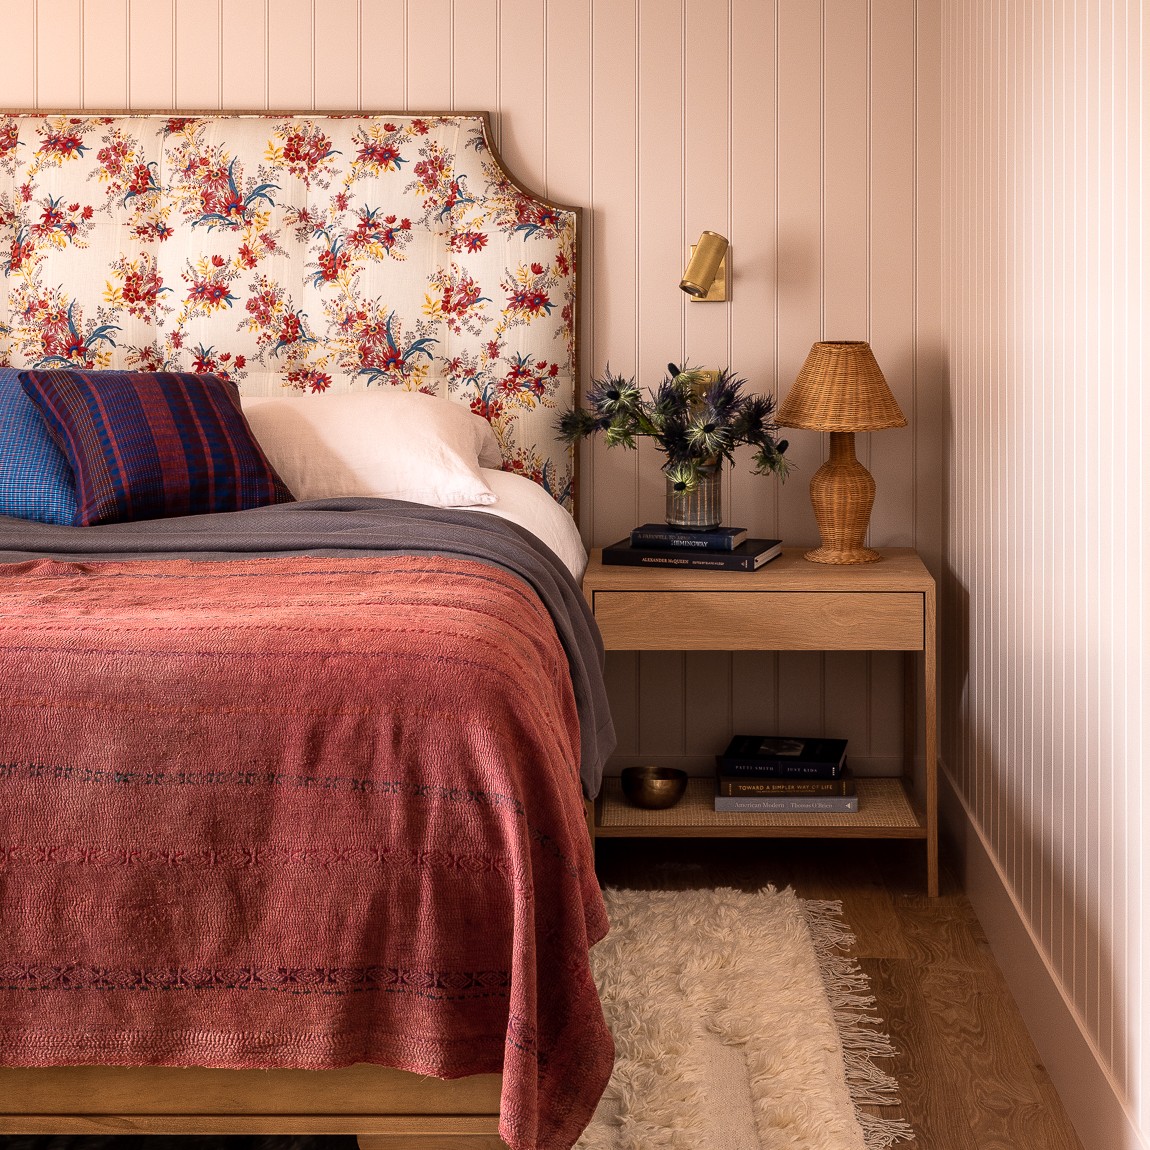 a bed with a floral headboard and a wooden night stand